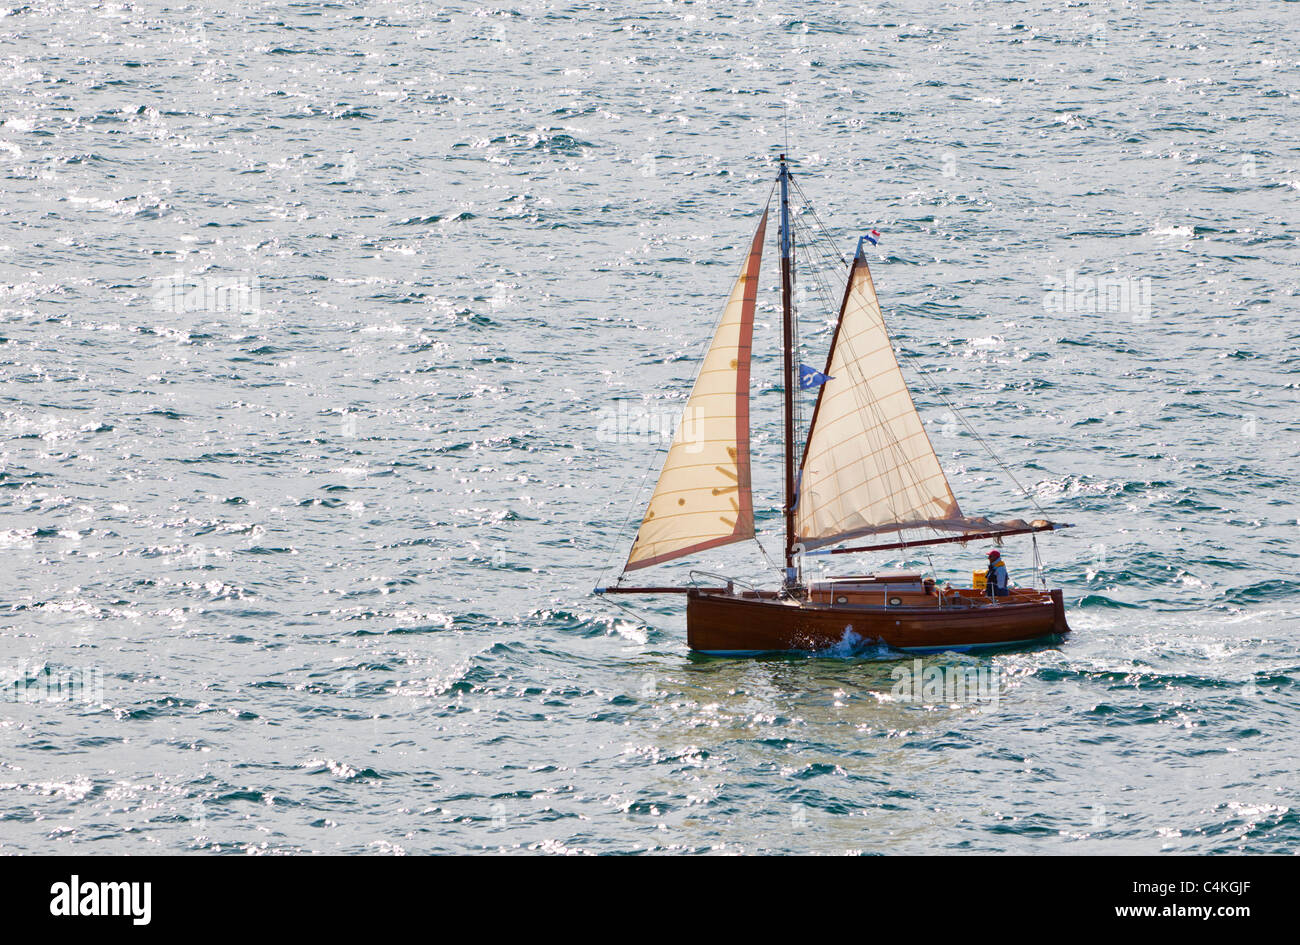 Small wooden sailing yacht en mer France Europe Banque D'Images